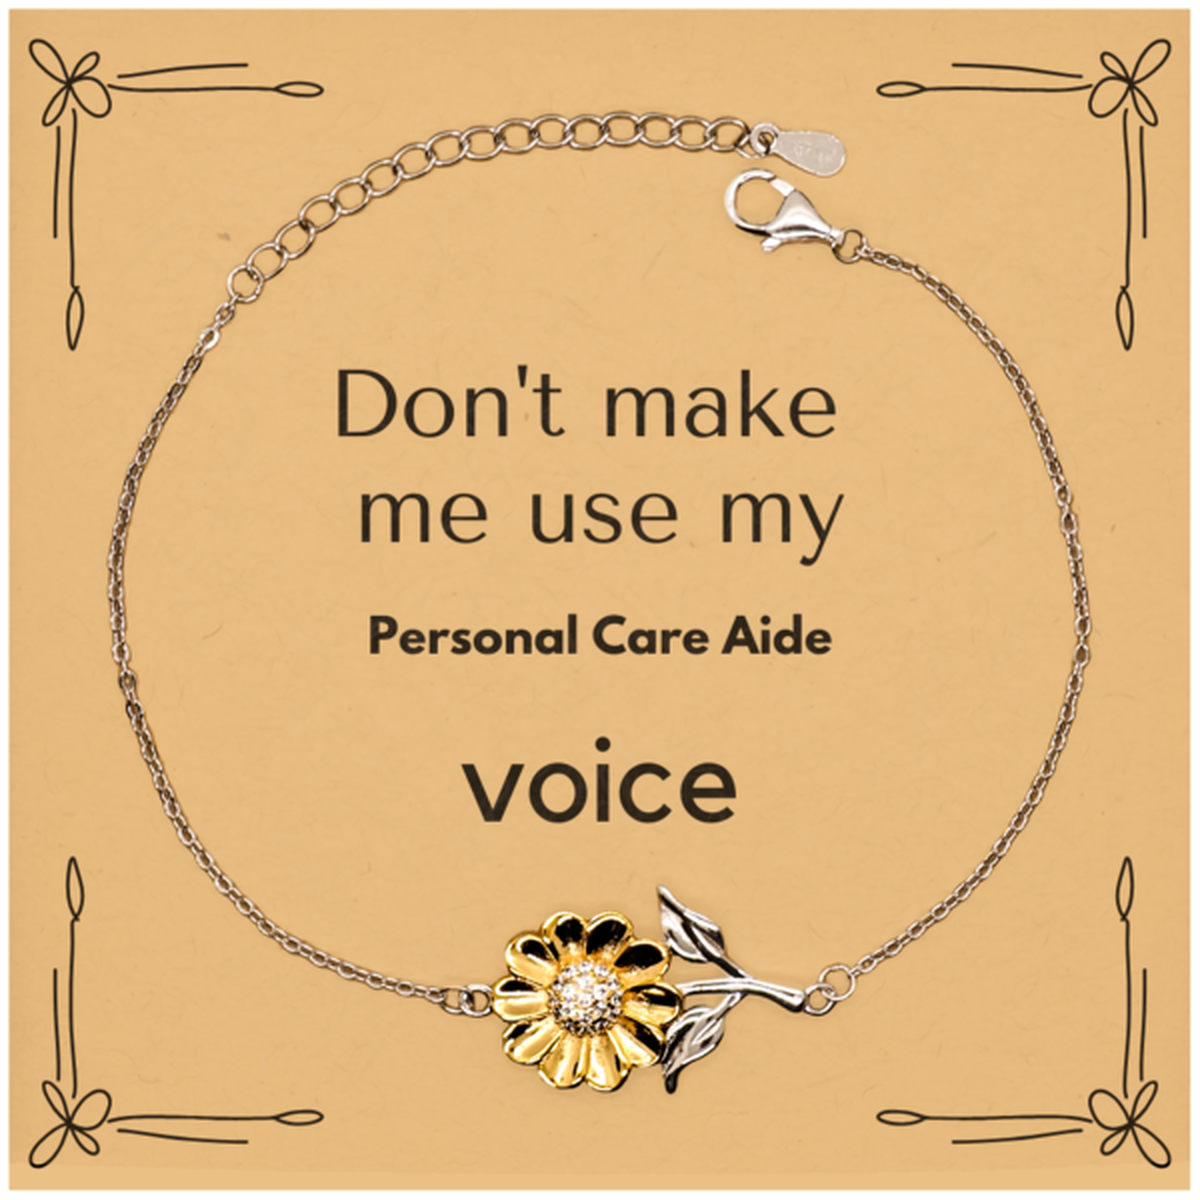 Don't make me use my Personal Care Aide voice, Sarcasm Personal Care Aide Card Gifts, Christmas Personal Care Aide Sunflower Bracelet Birthday Unique Gifts For Personal Care Aide Coworkers, Men, Women, Colleague, Friends